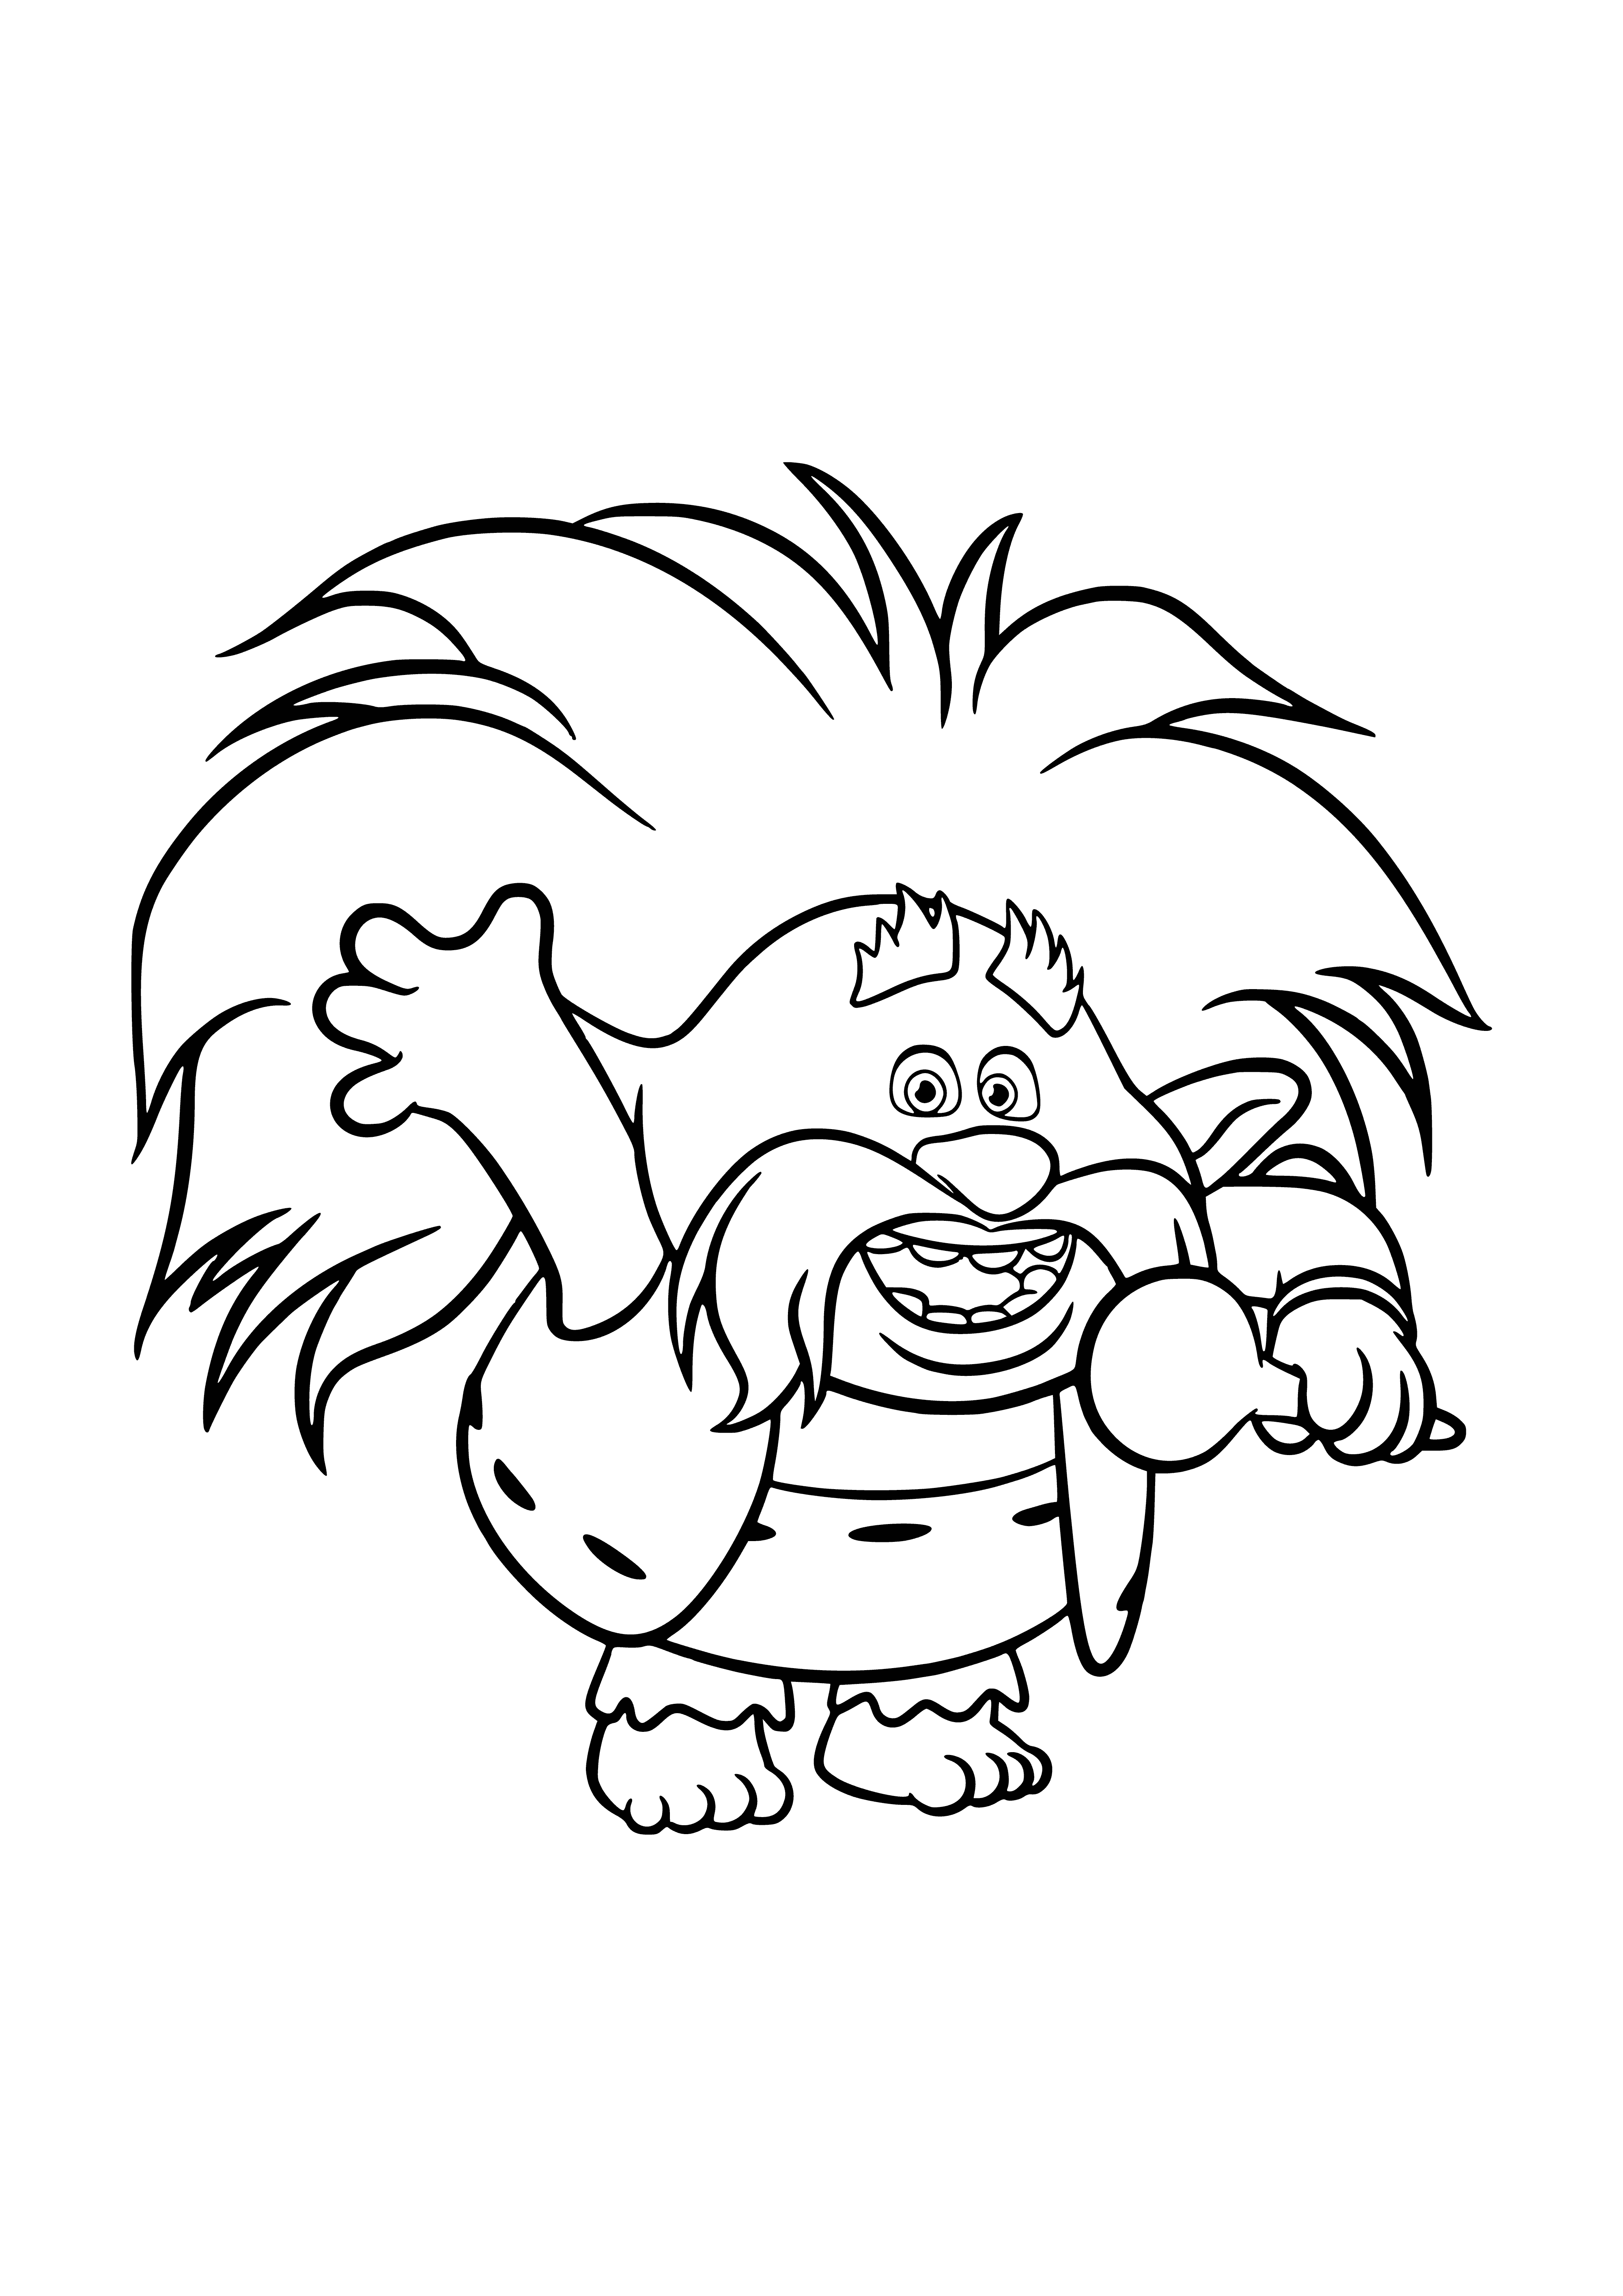 coloring page: Big pink troll King wears crown, cape & wields scepter. Has big nose & mouth. Likes to cause mischief!